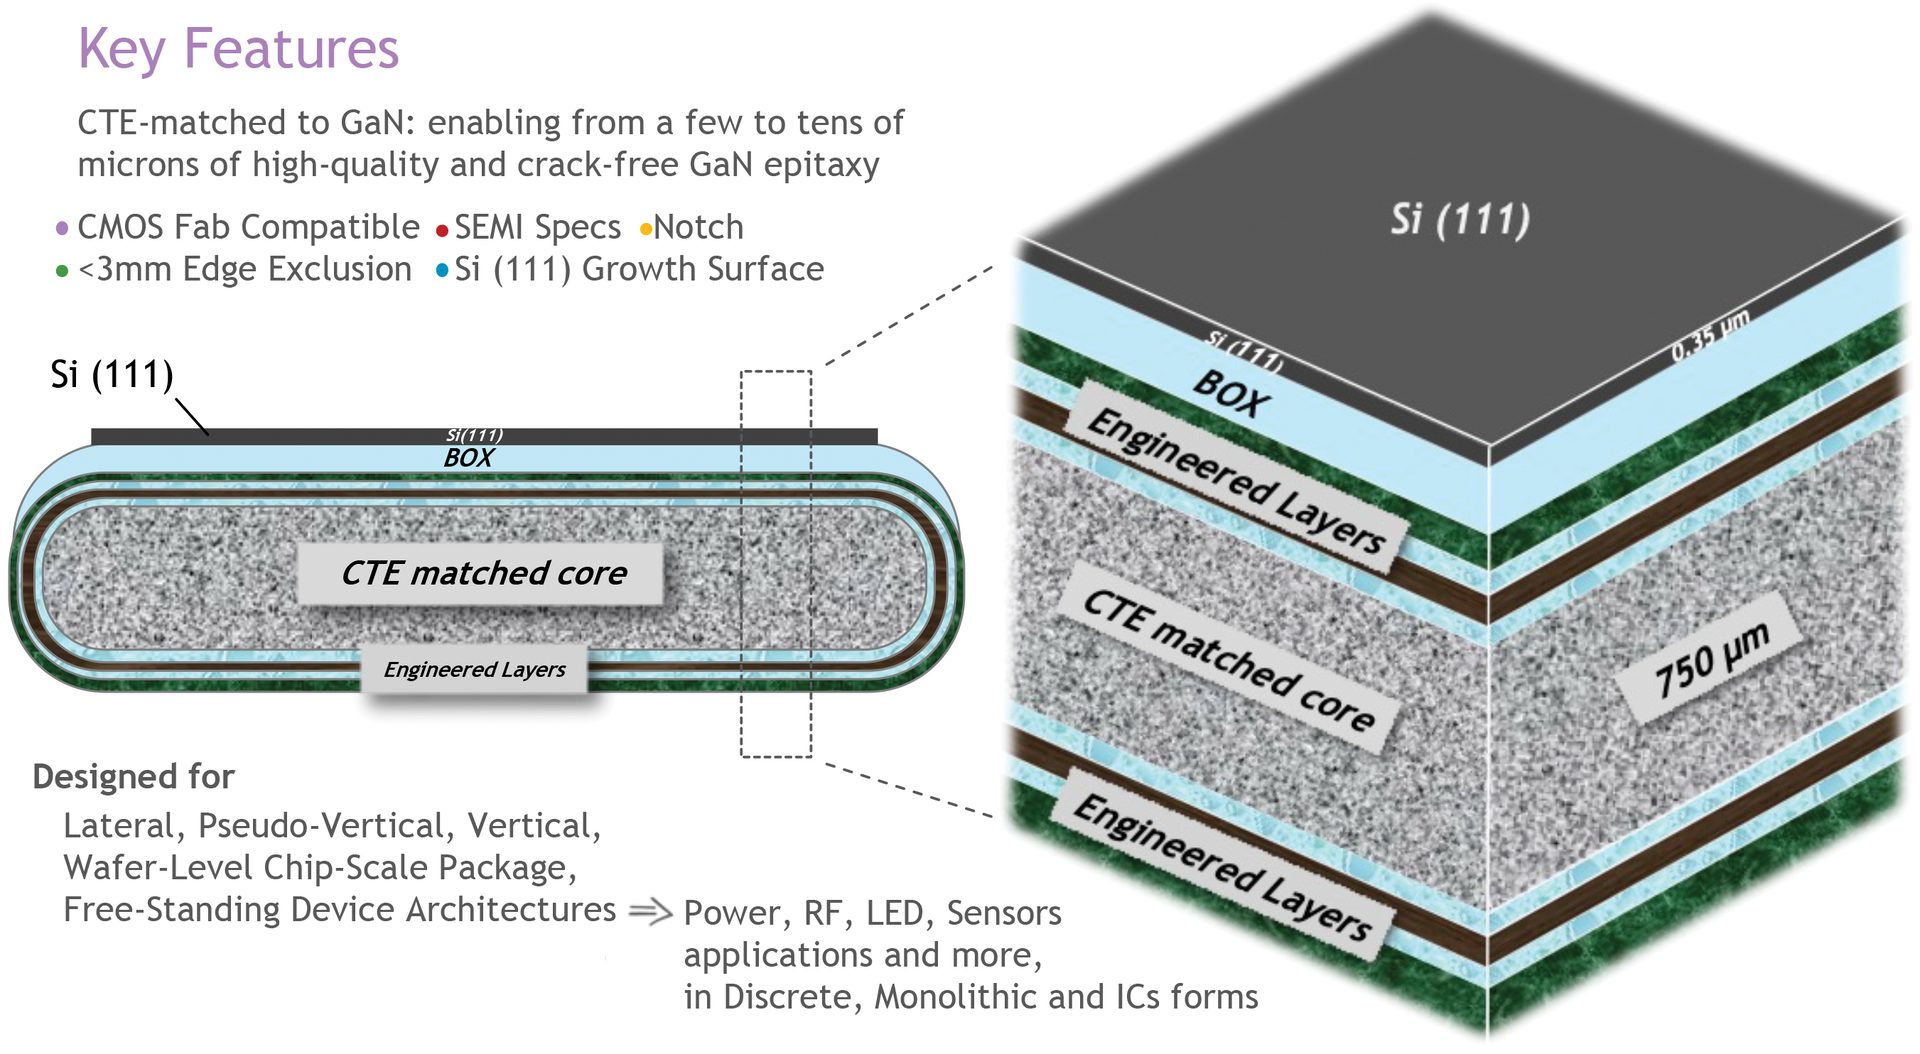 The CMOS fab-friendly, SEMI Spec QST substrate structure